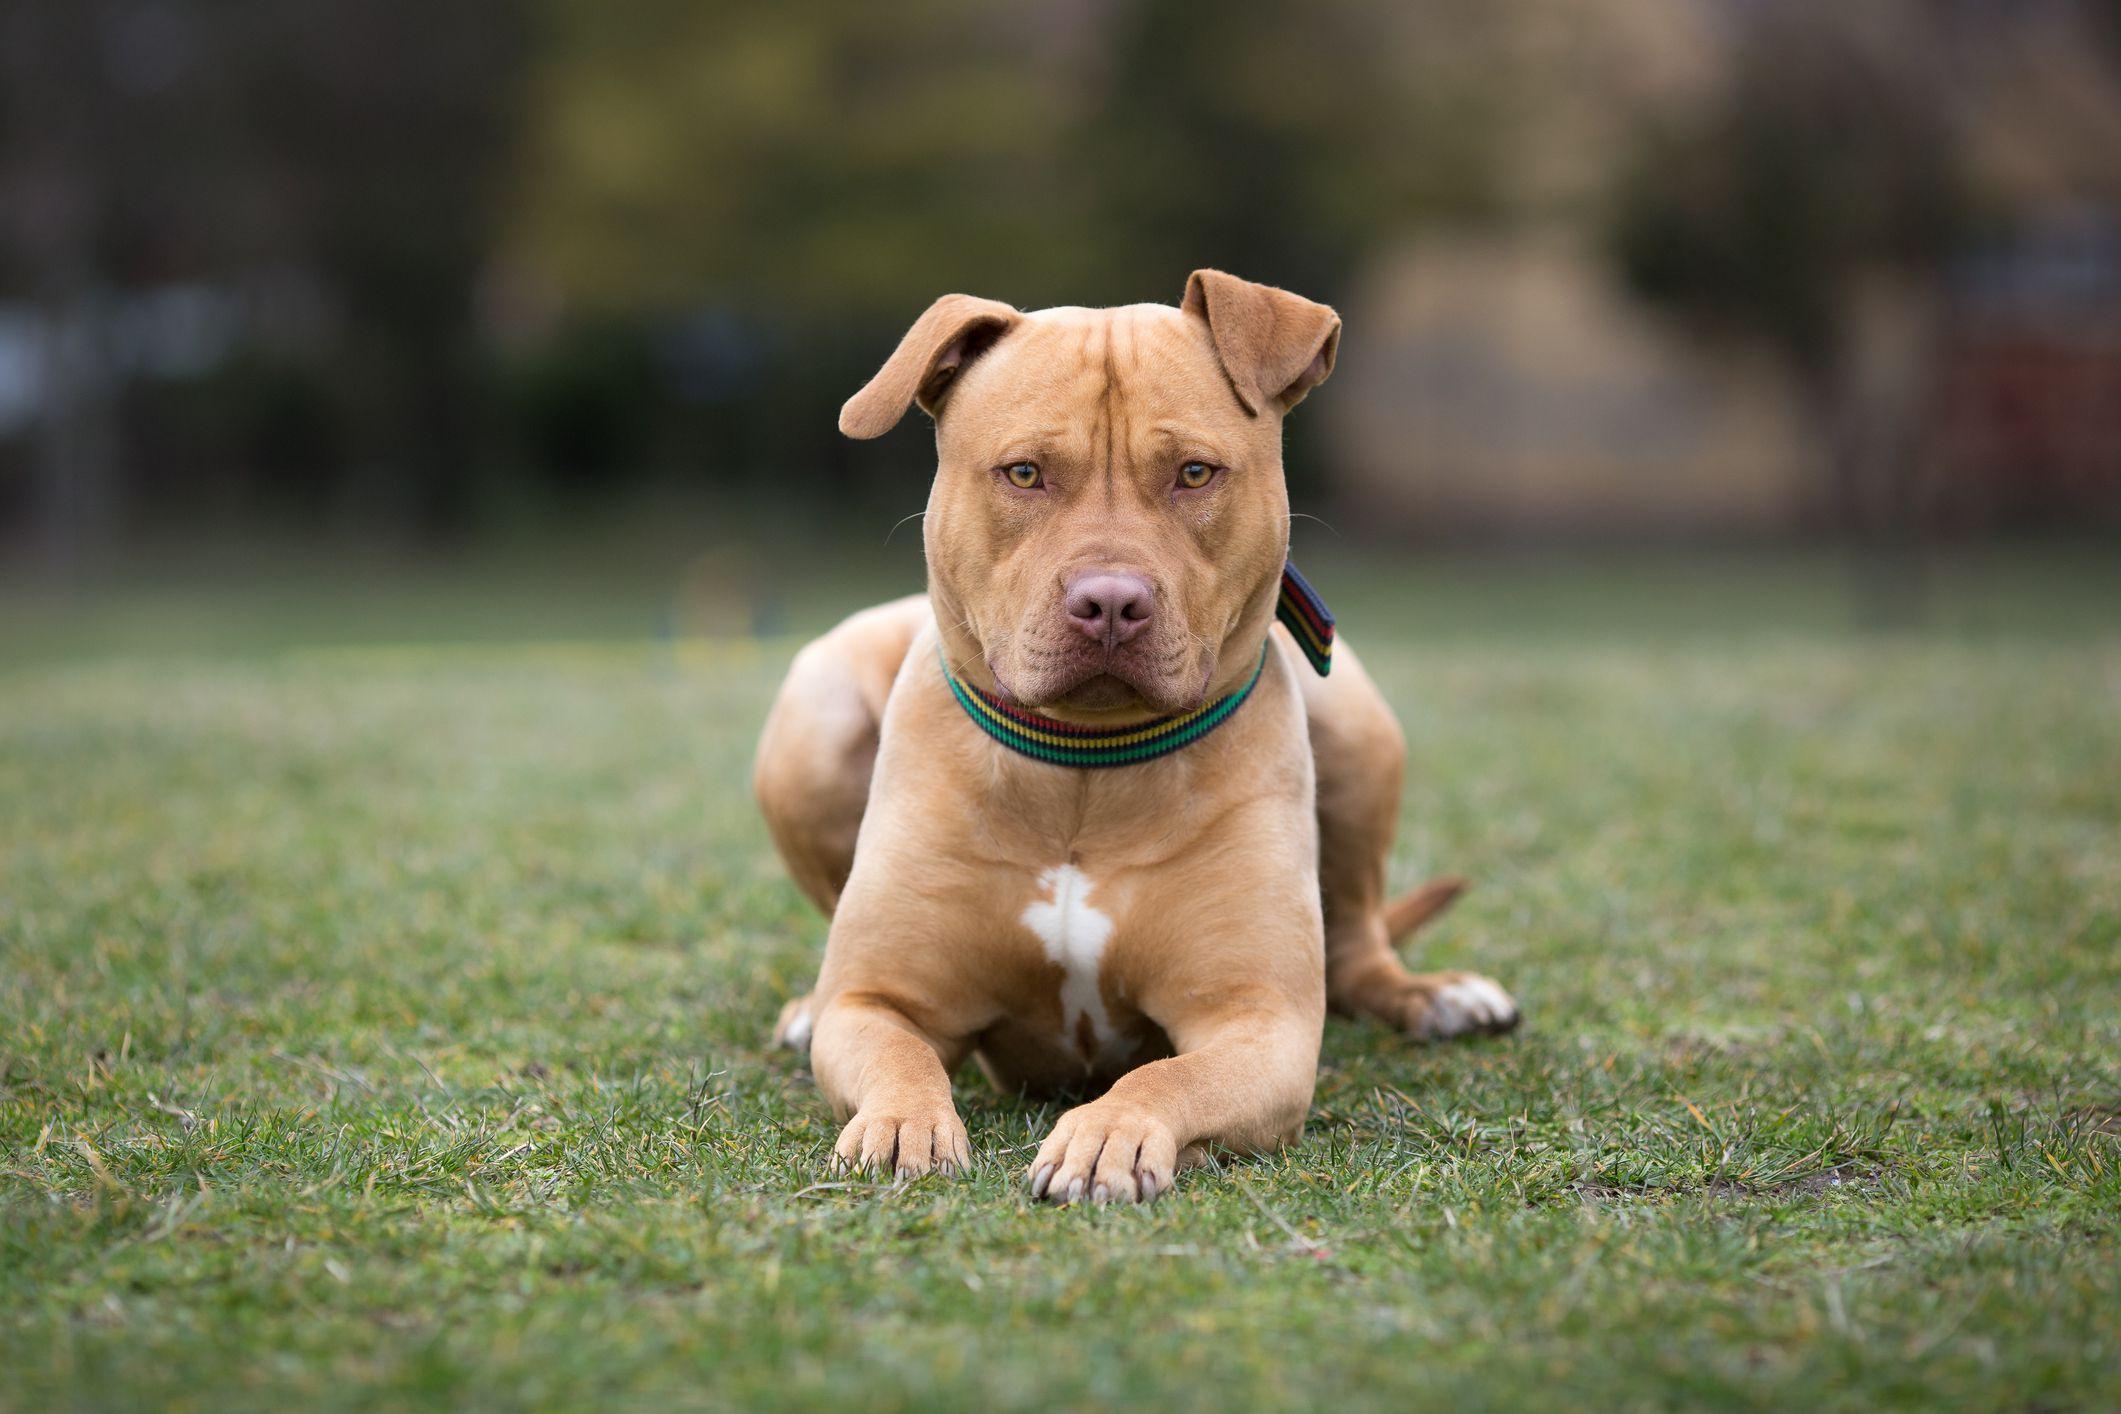 American Staffordshire Terrier: Full Profile, History, and Care